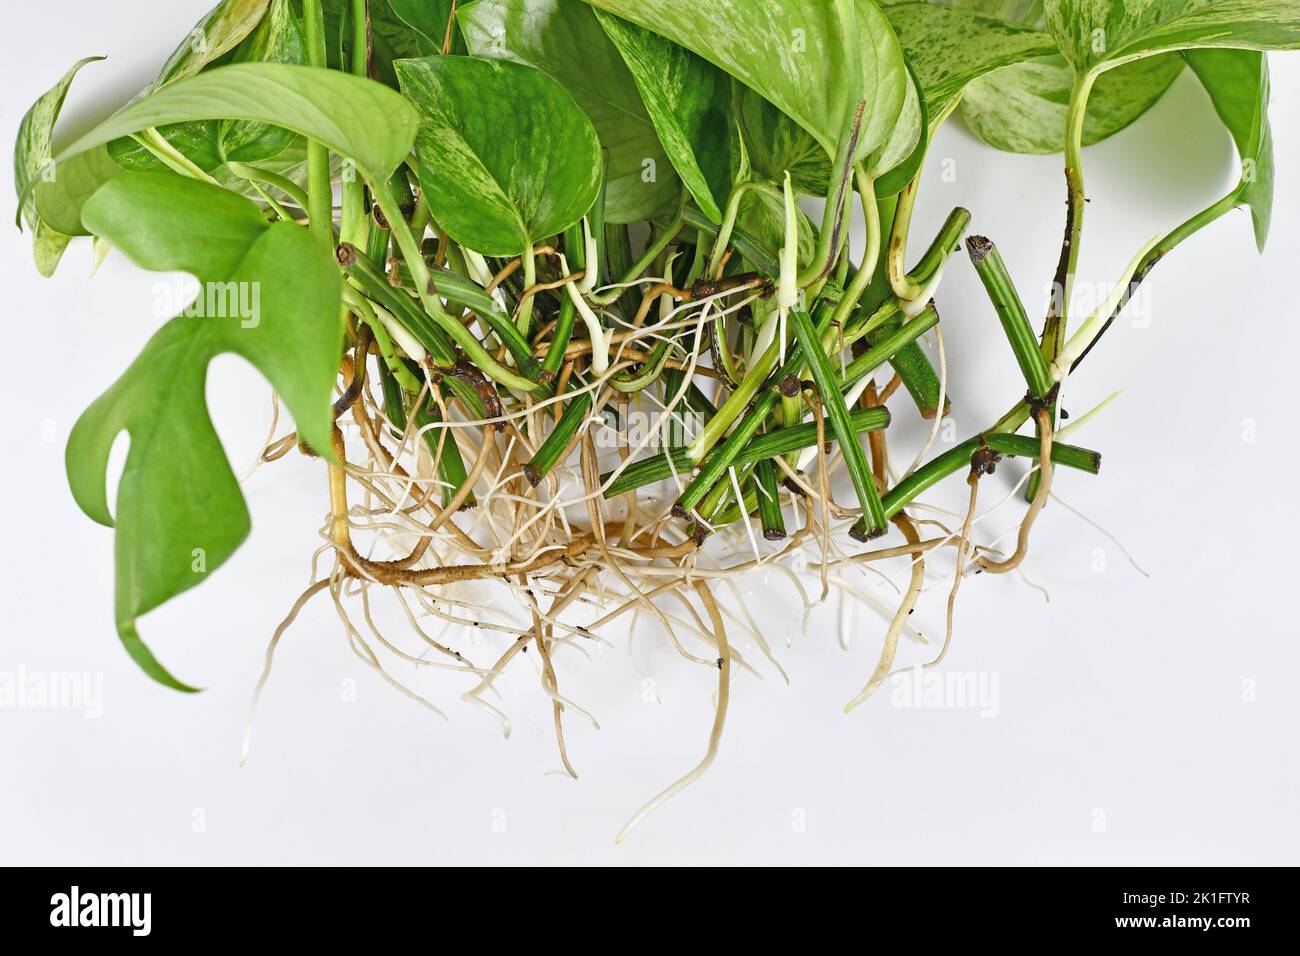 Bunch of Marble Queen pothos houseplant cuttings with long bare roots Stock Photo